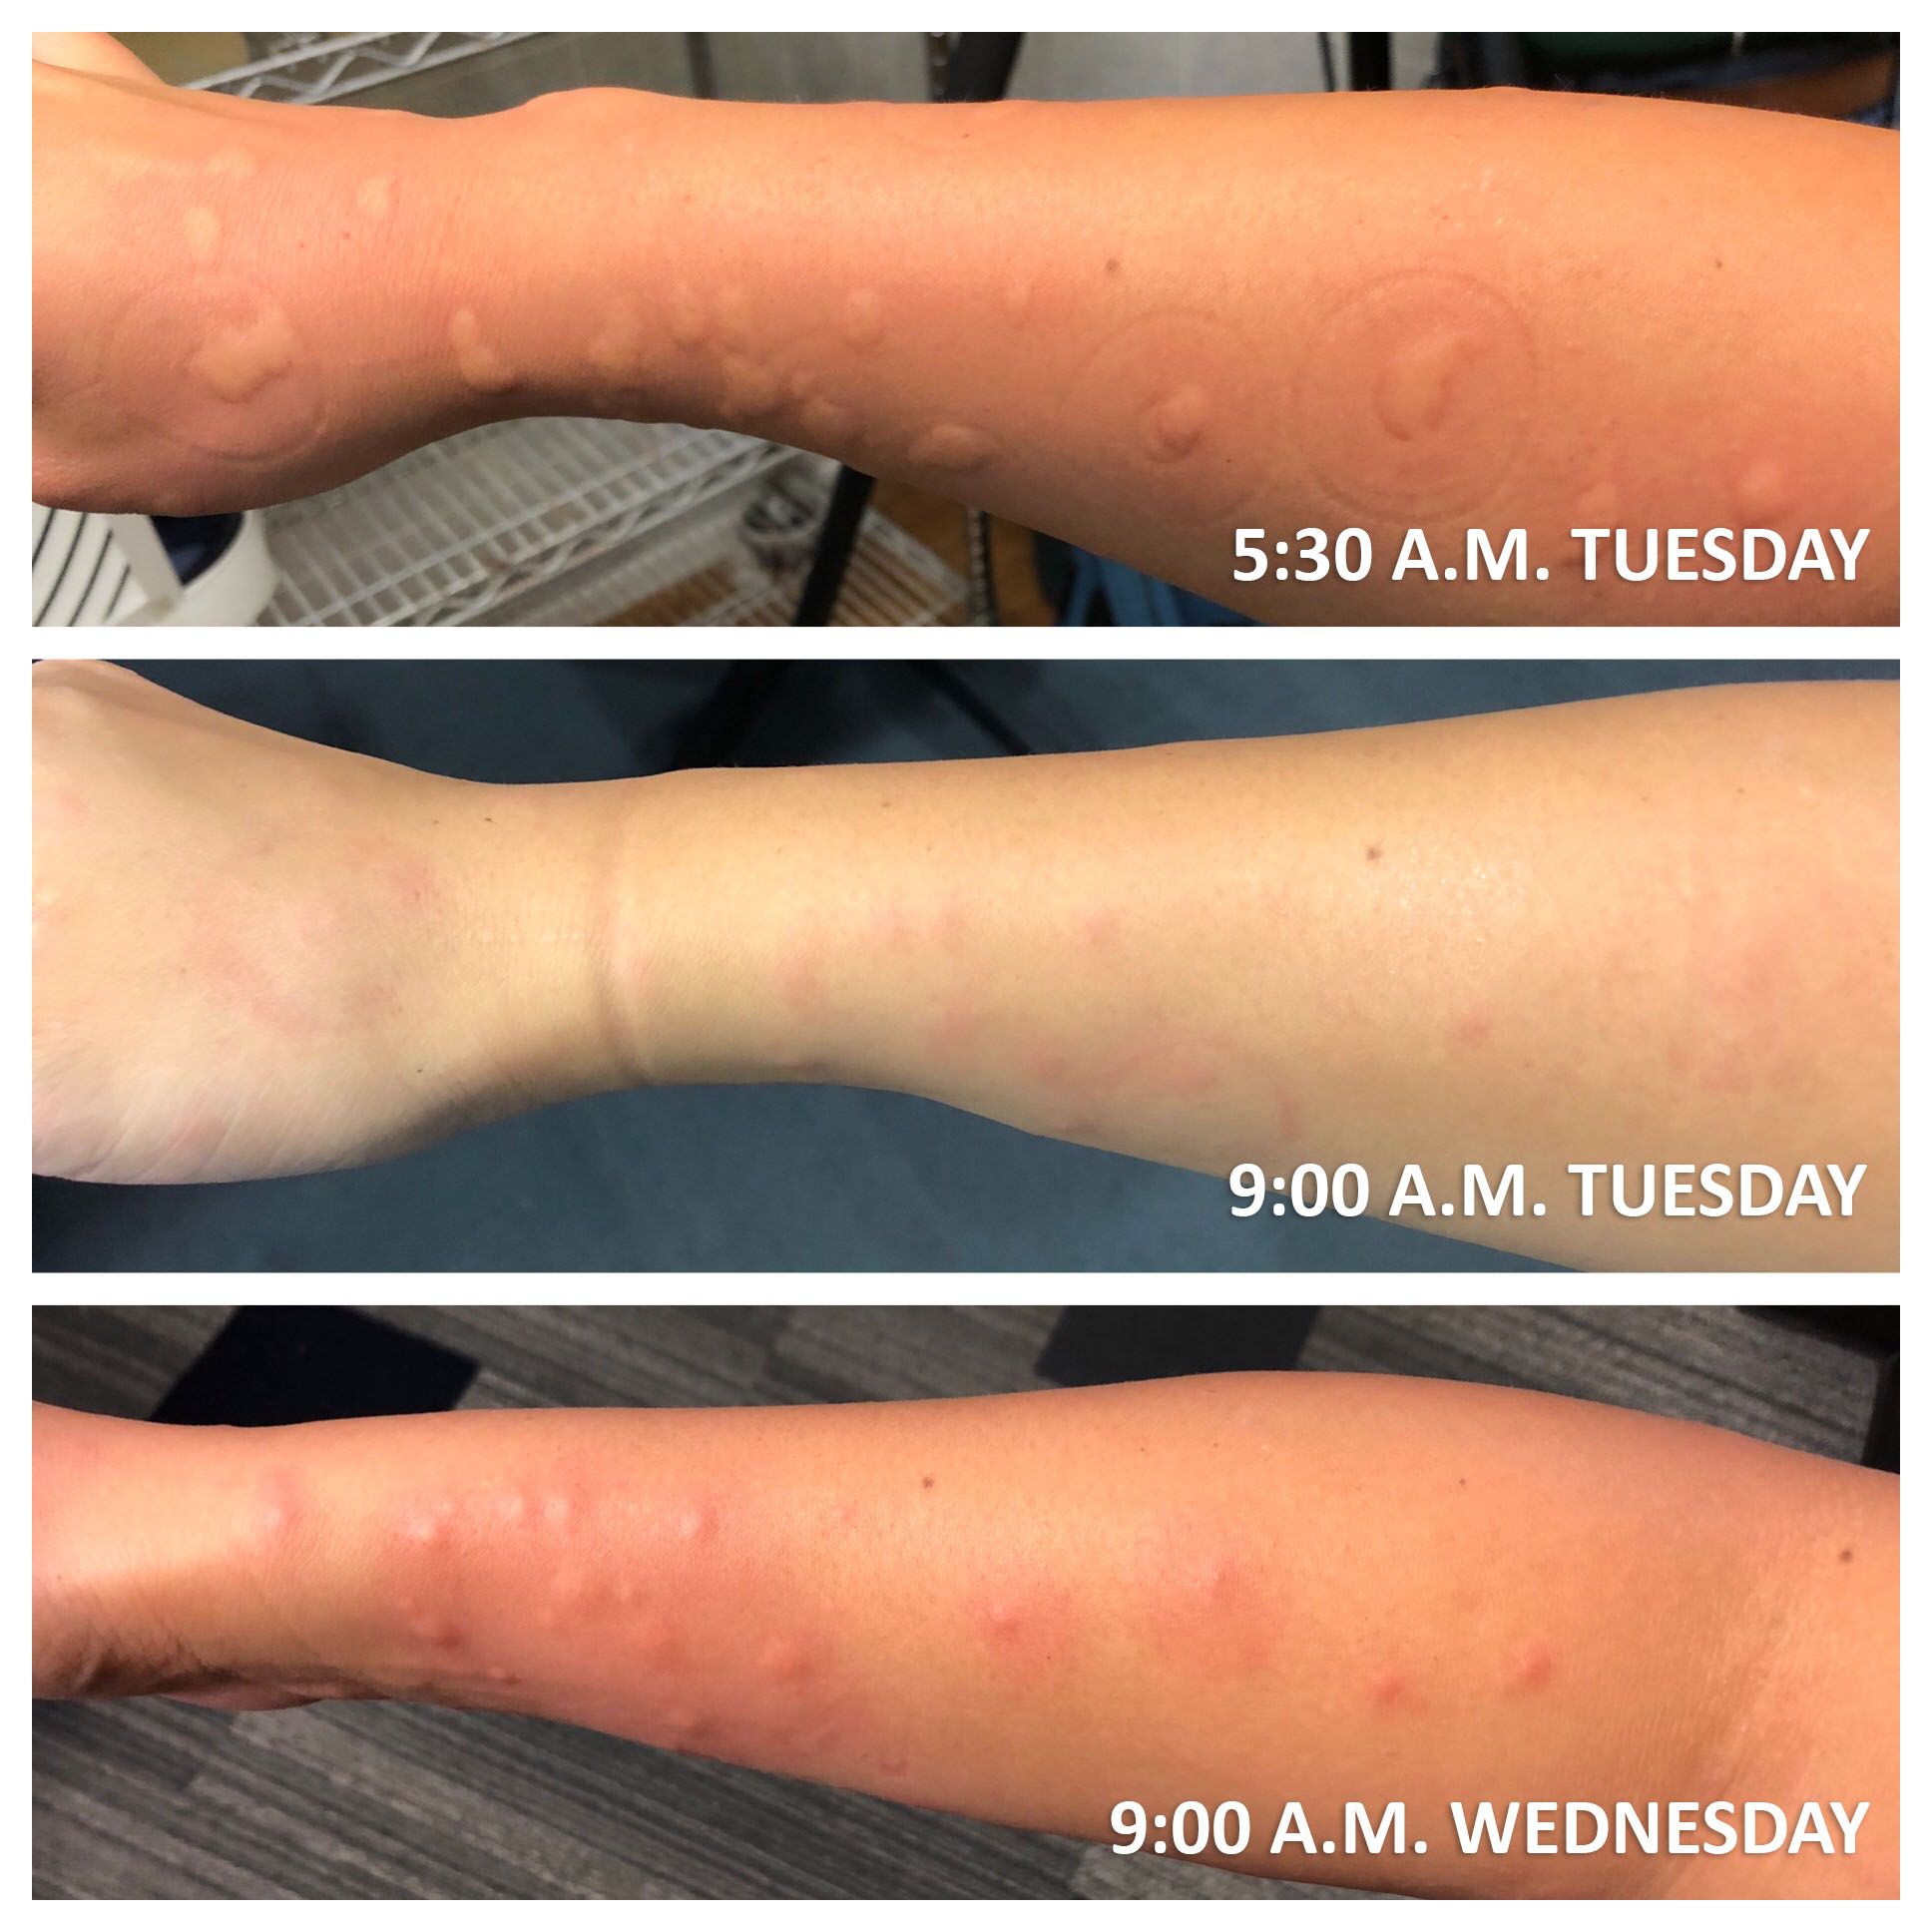 The Bug Bite Thing Works Fast, According to Pediatrician